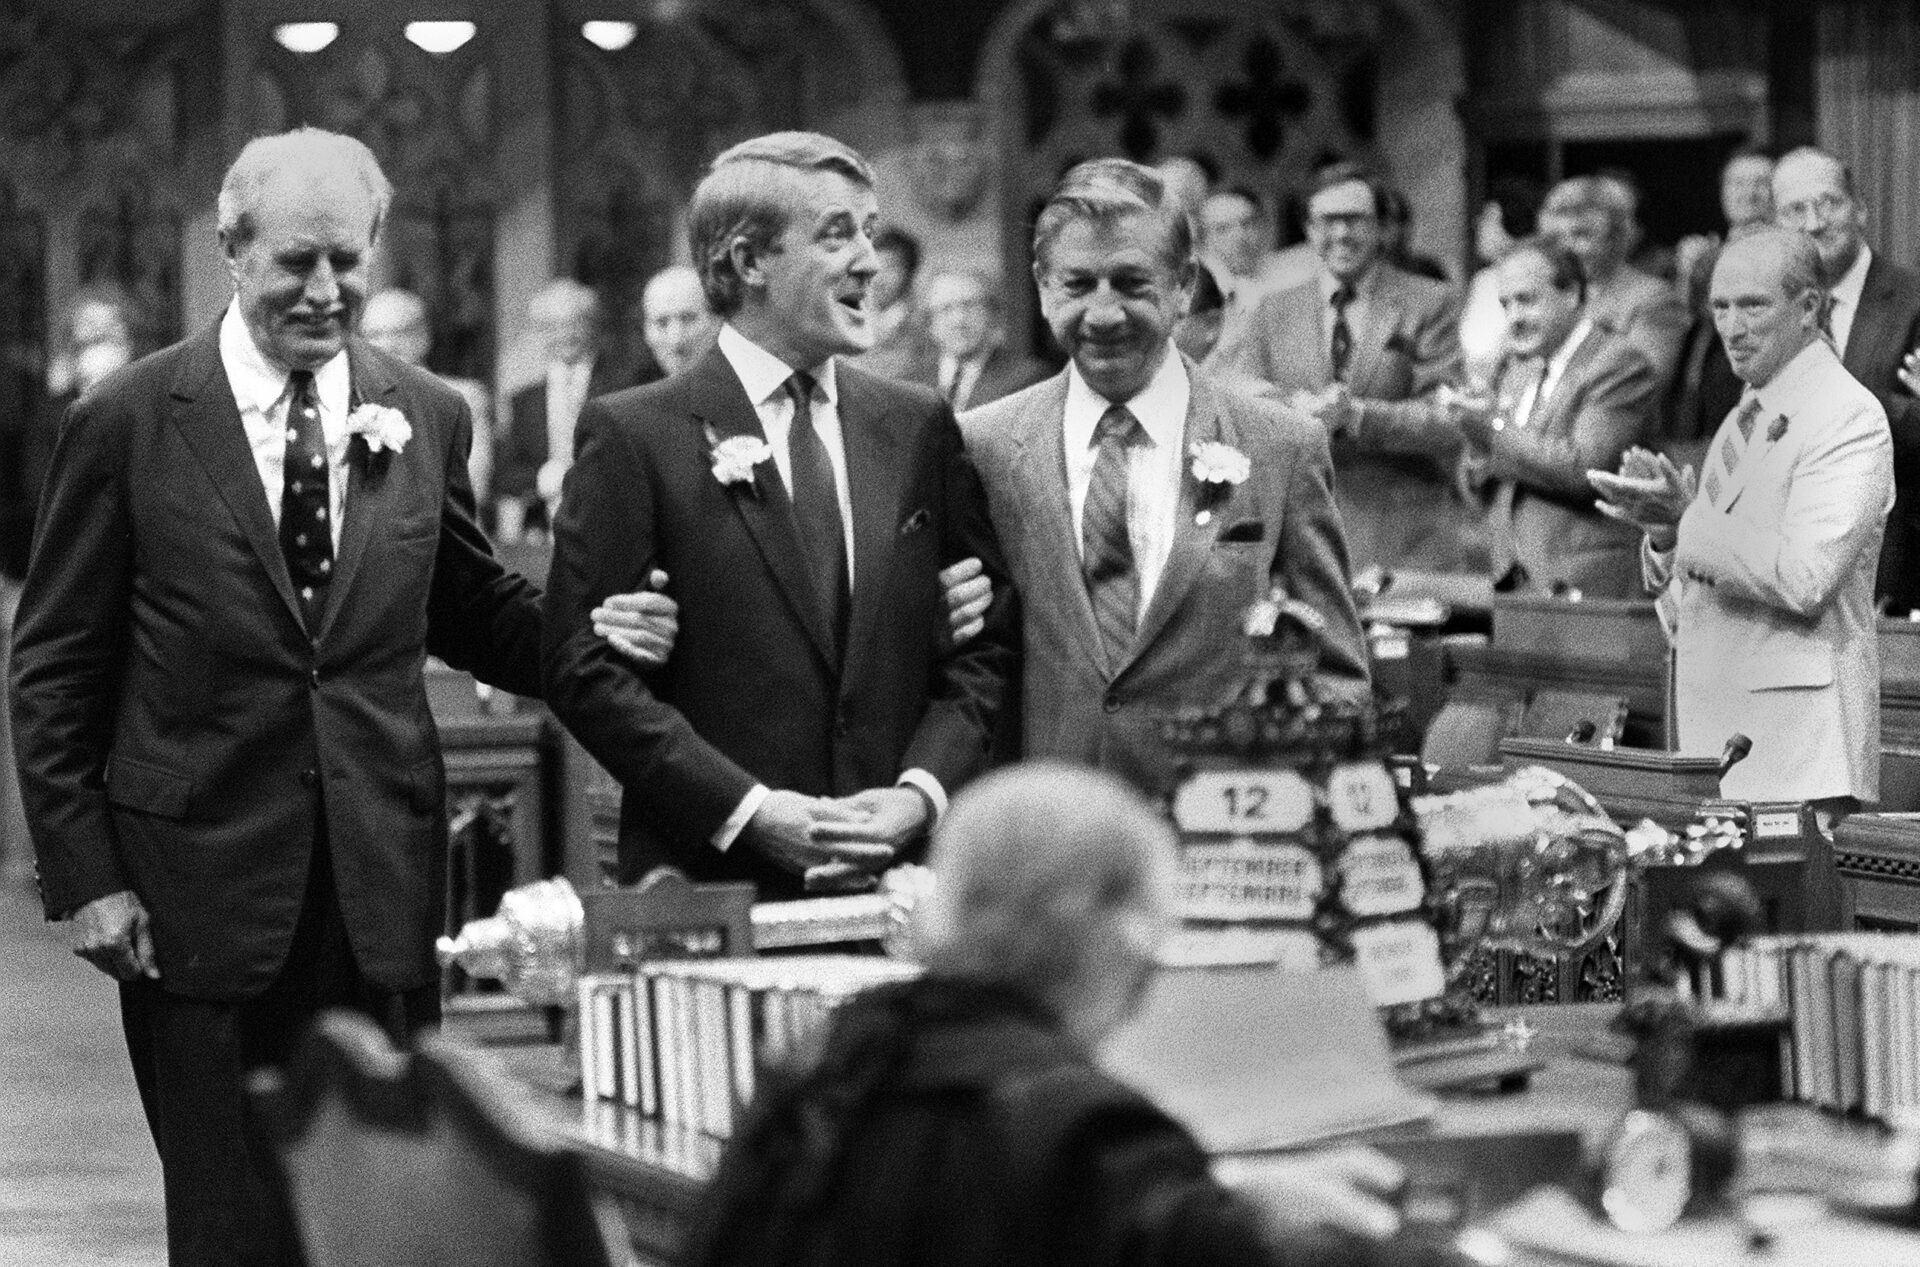 Rows of men in suits stand smiling and clapping as they watch Mulroney, who is flanked by two smiling men in suits. Each has an arm through Mulroney’s.